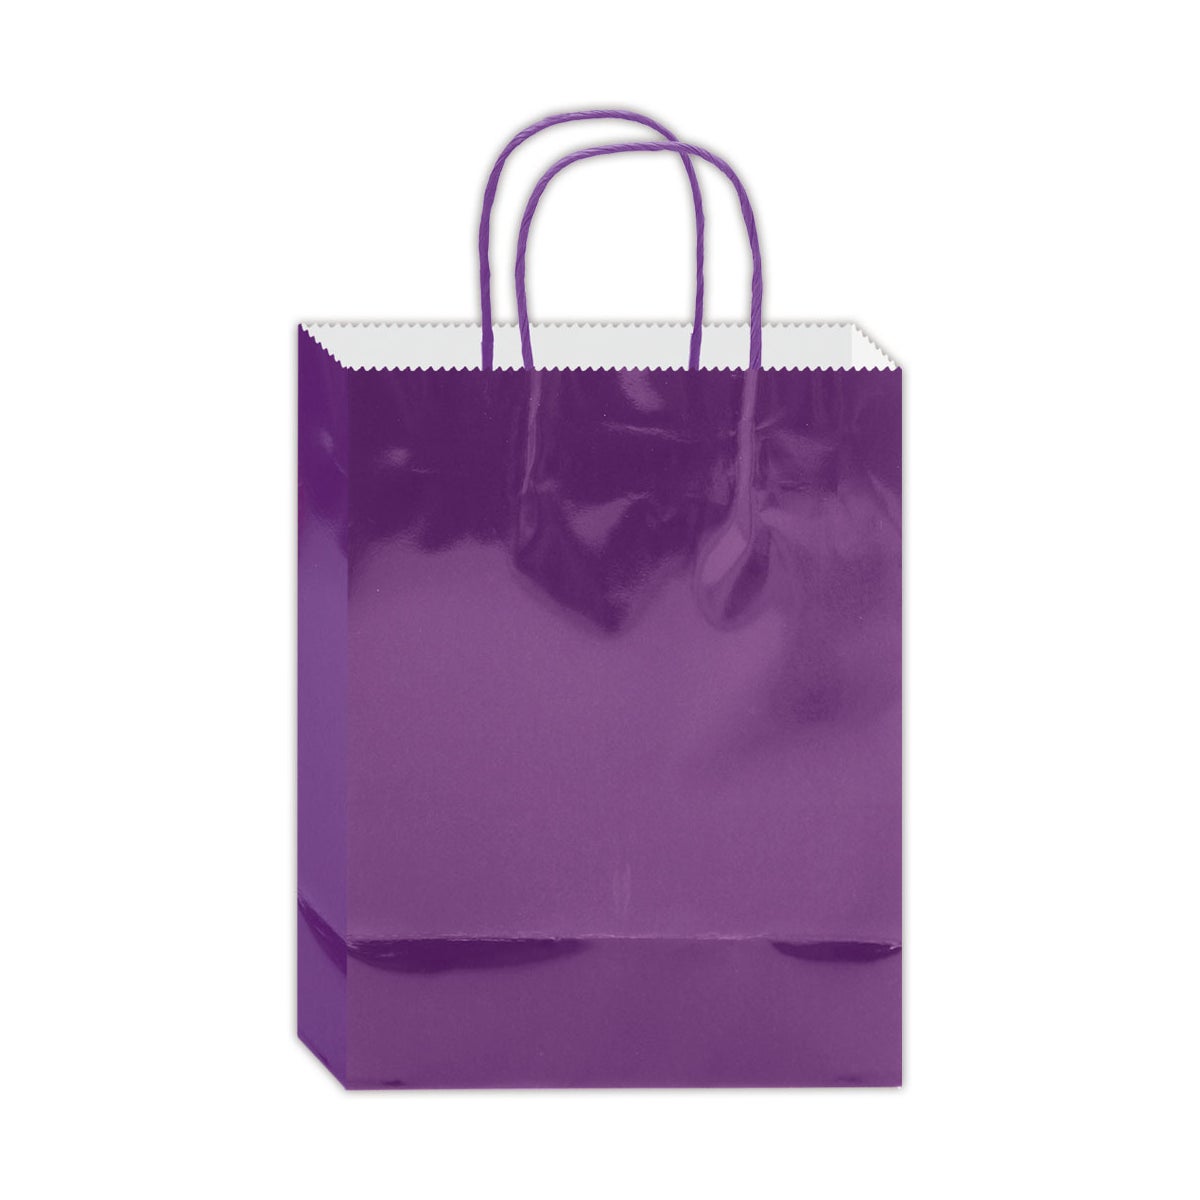 gift bag 13x10.5x5.5/L 48/96s purple glossy - solid color gift bags